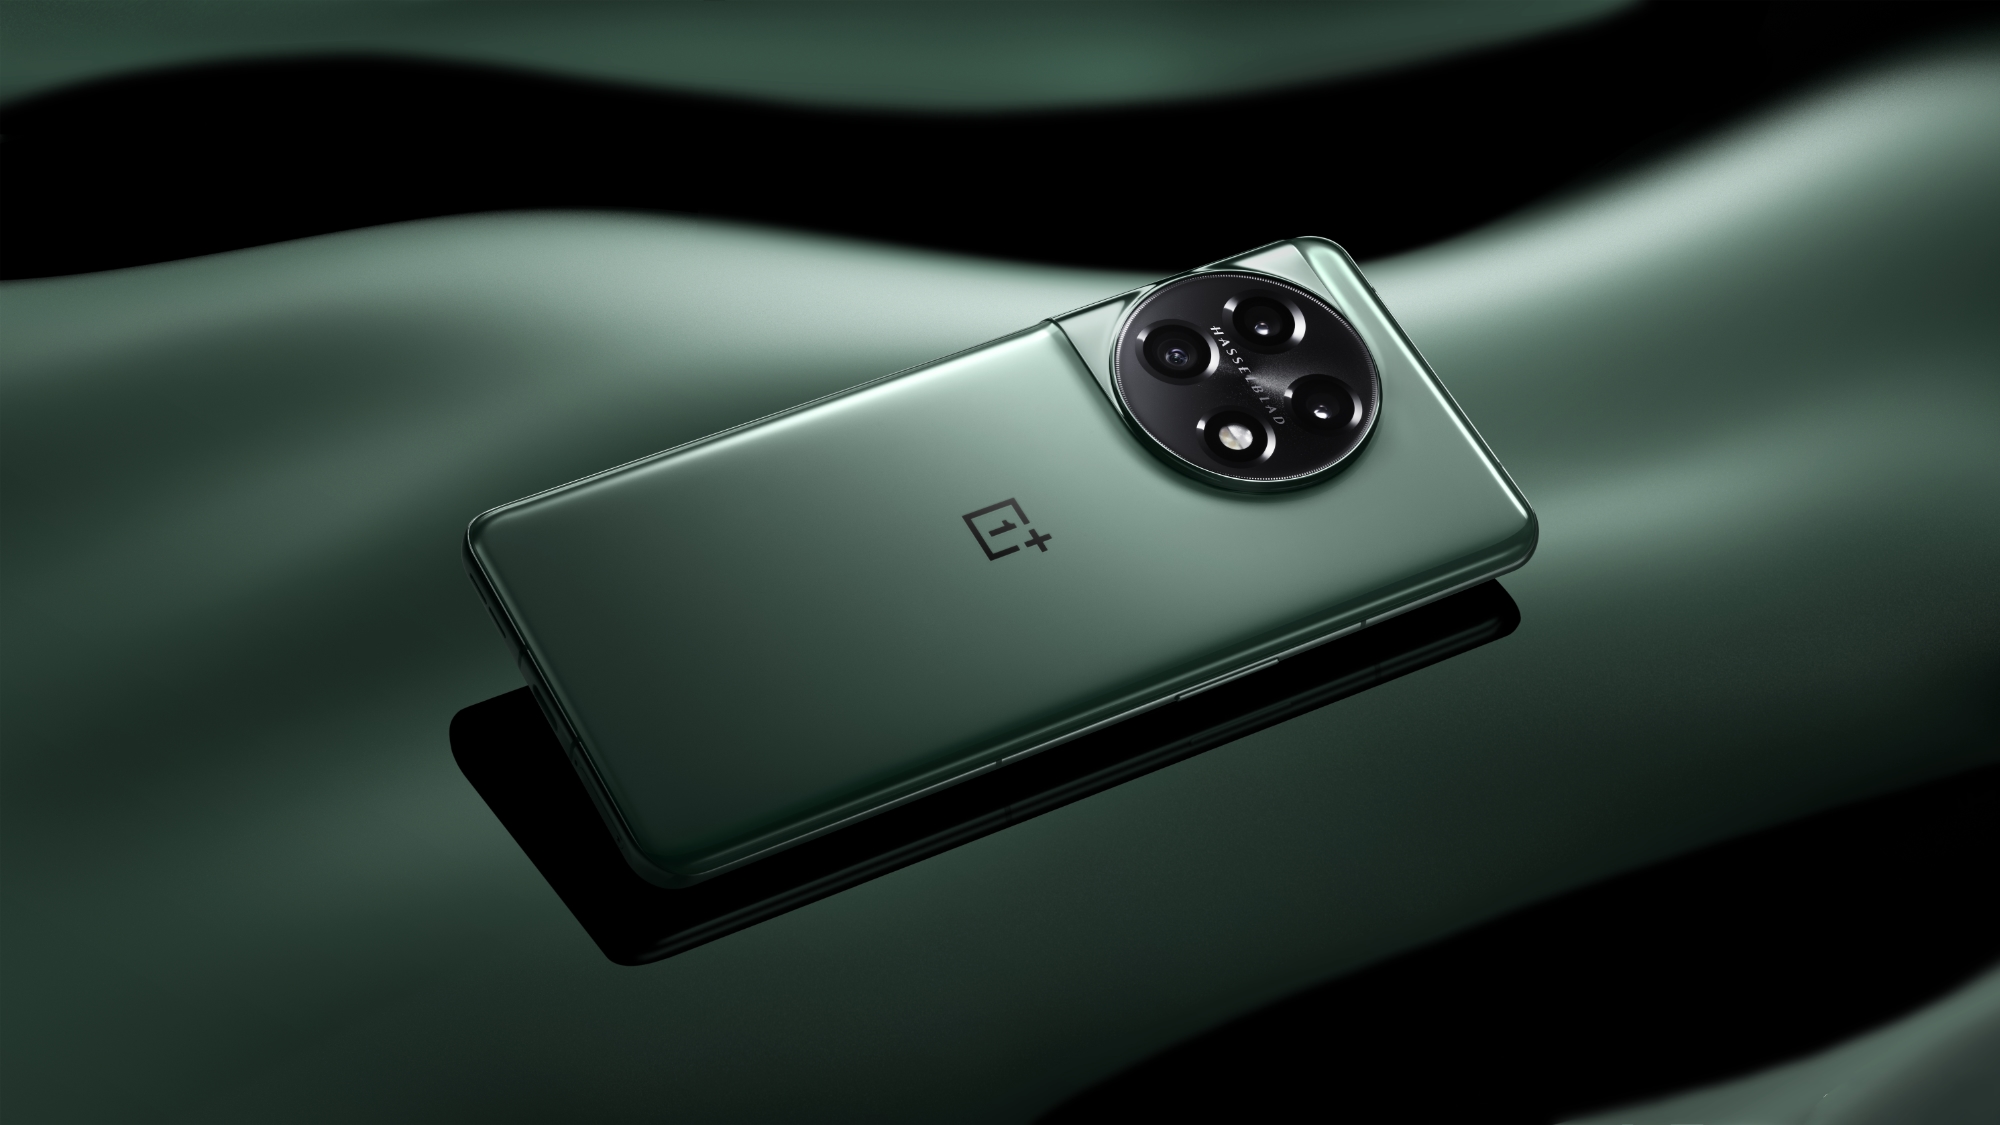 It's official: OnePlus 11 with Hasselblad camera, Snapdragon 8 Gen 2 chip and 100W charging will be unveiled on January 4